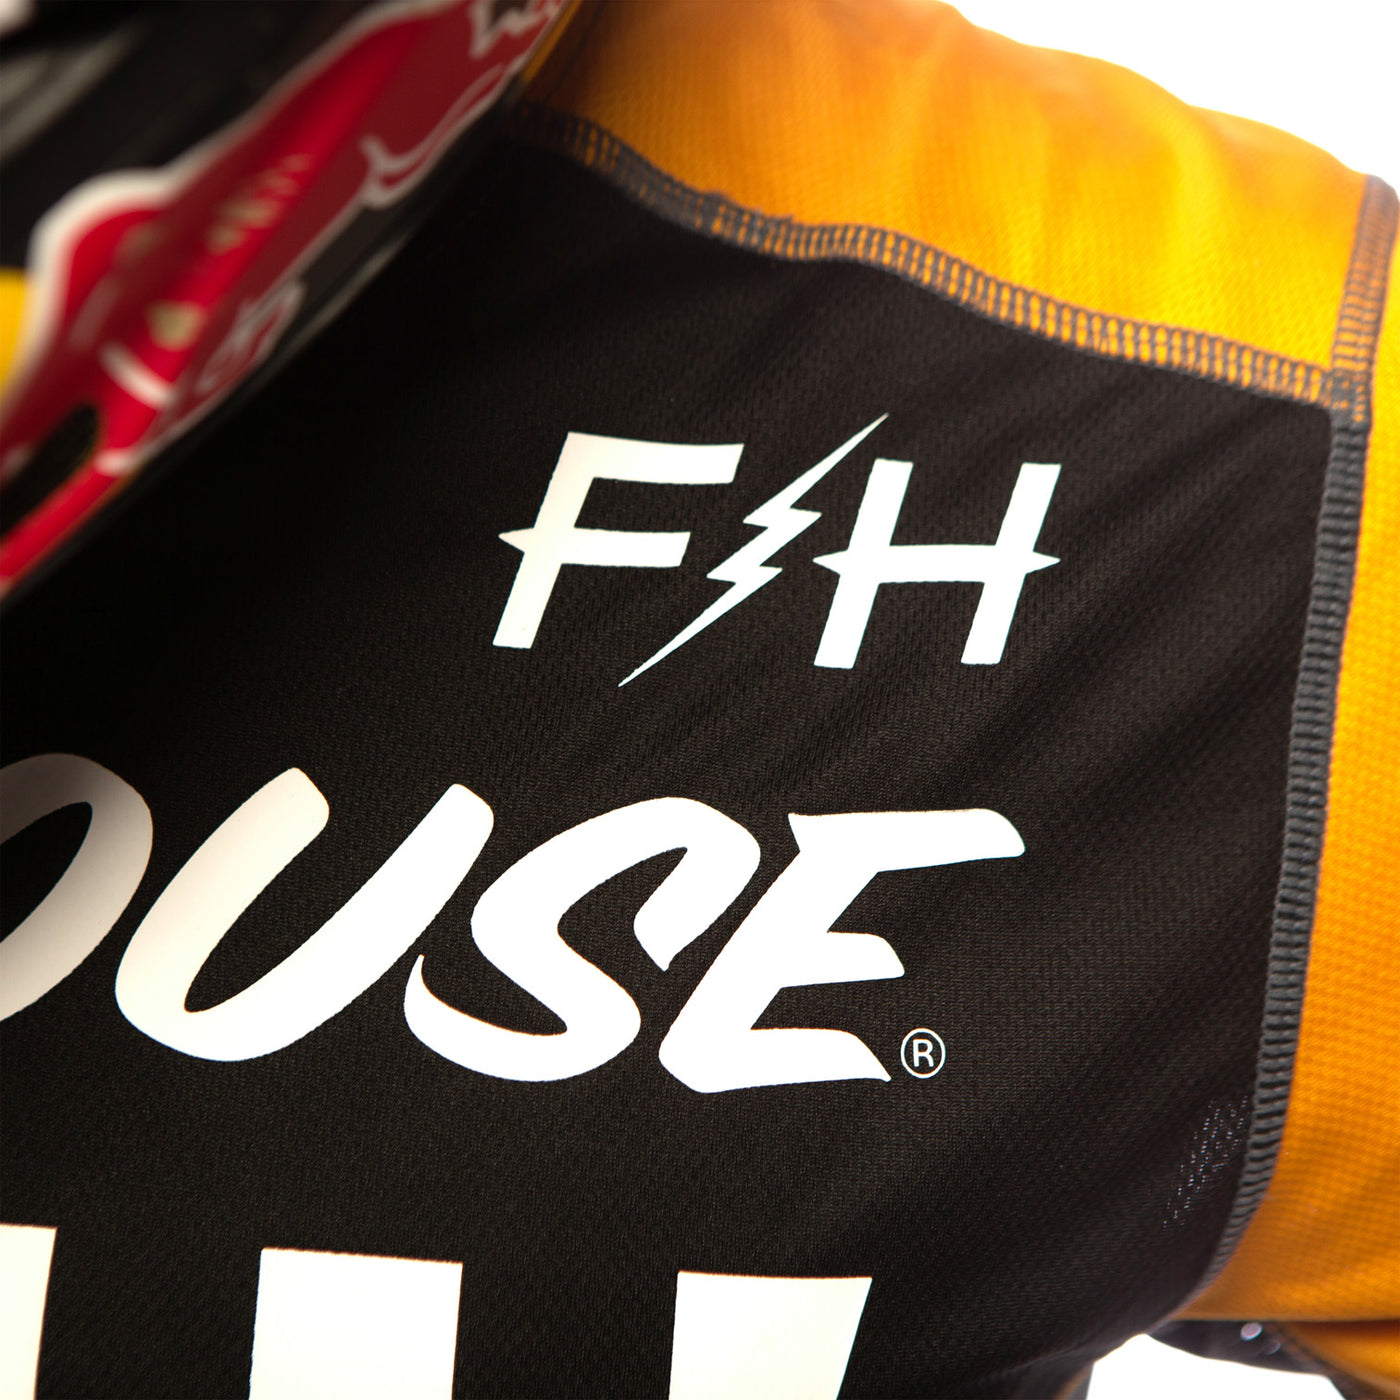 Fasthouse Grindhouse Alpha Jersey